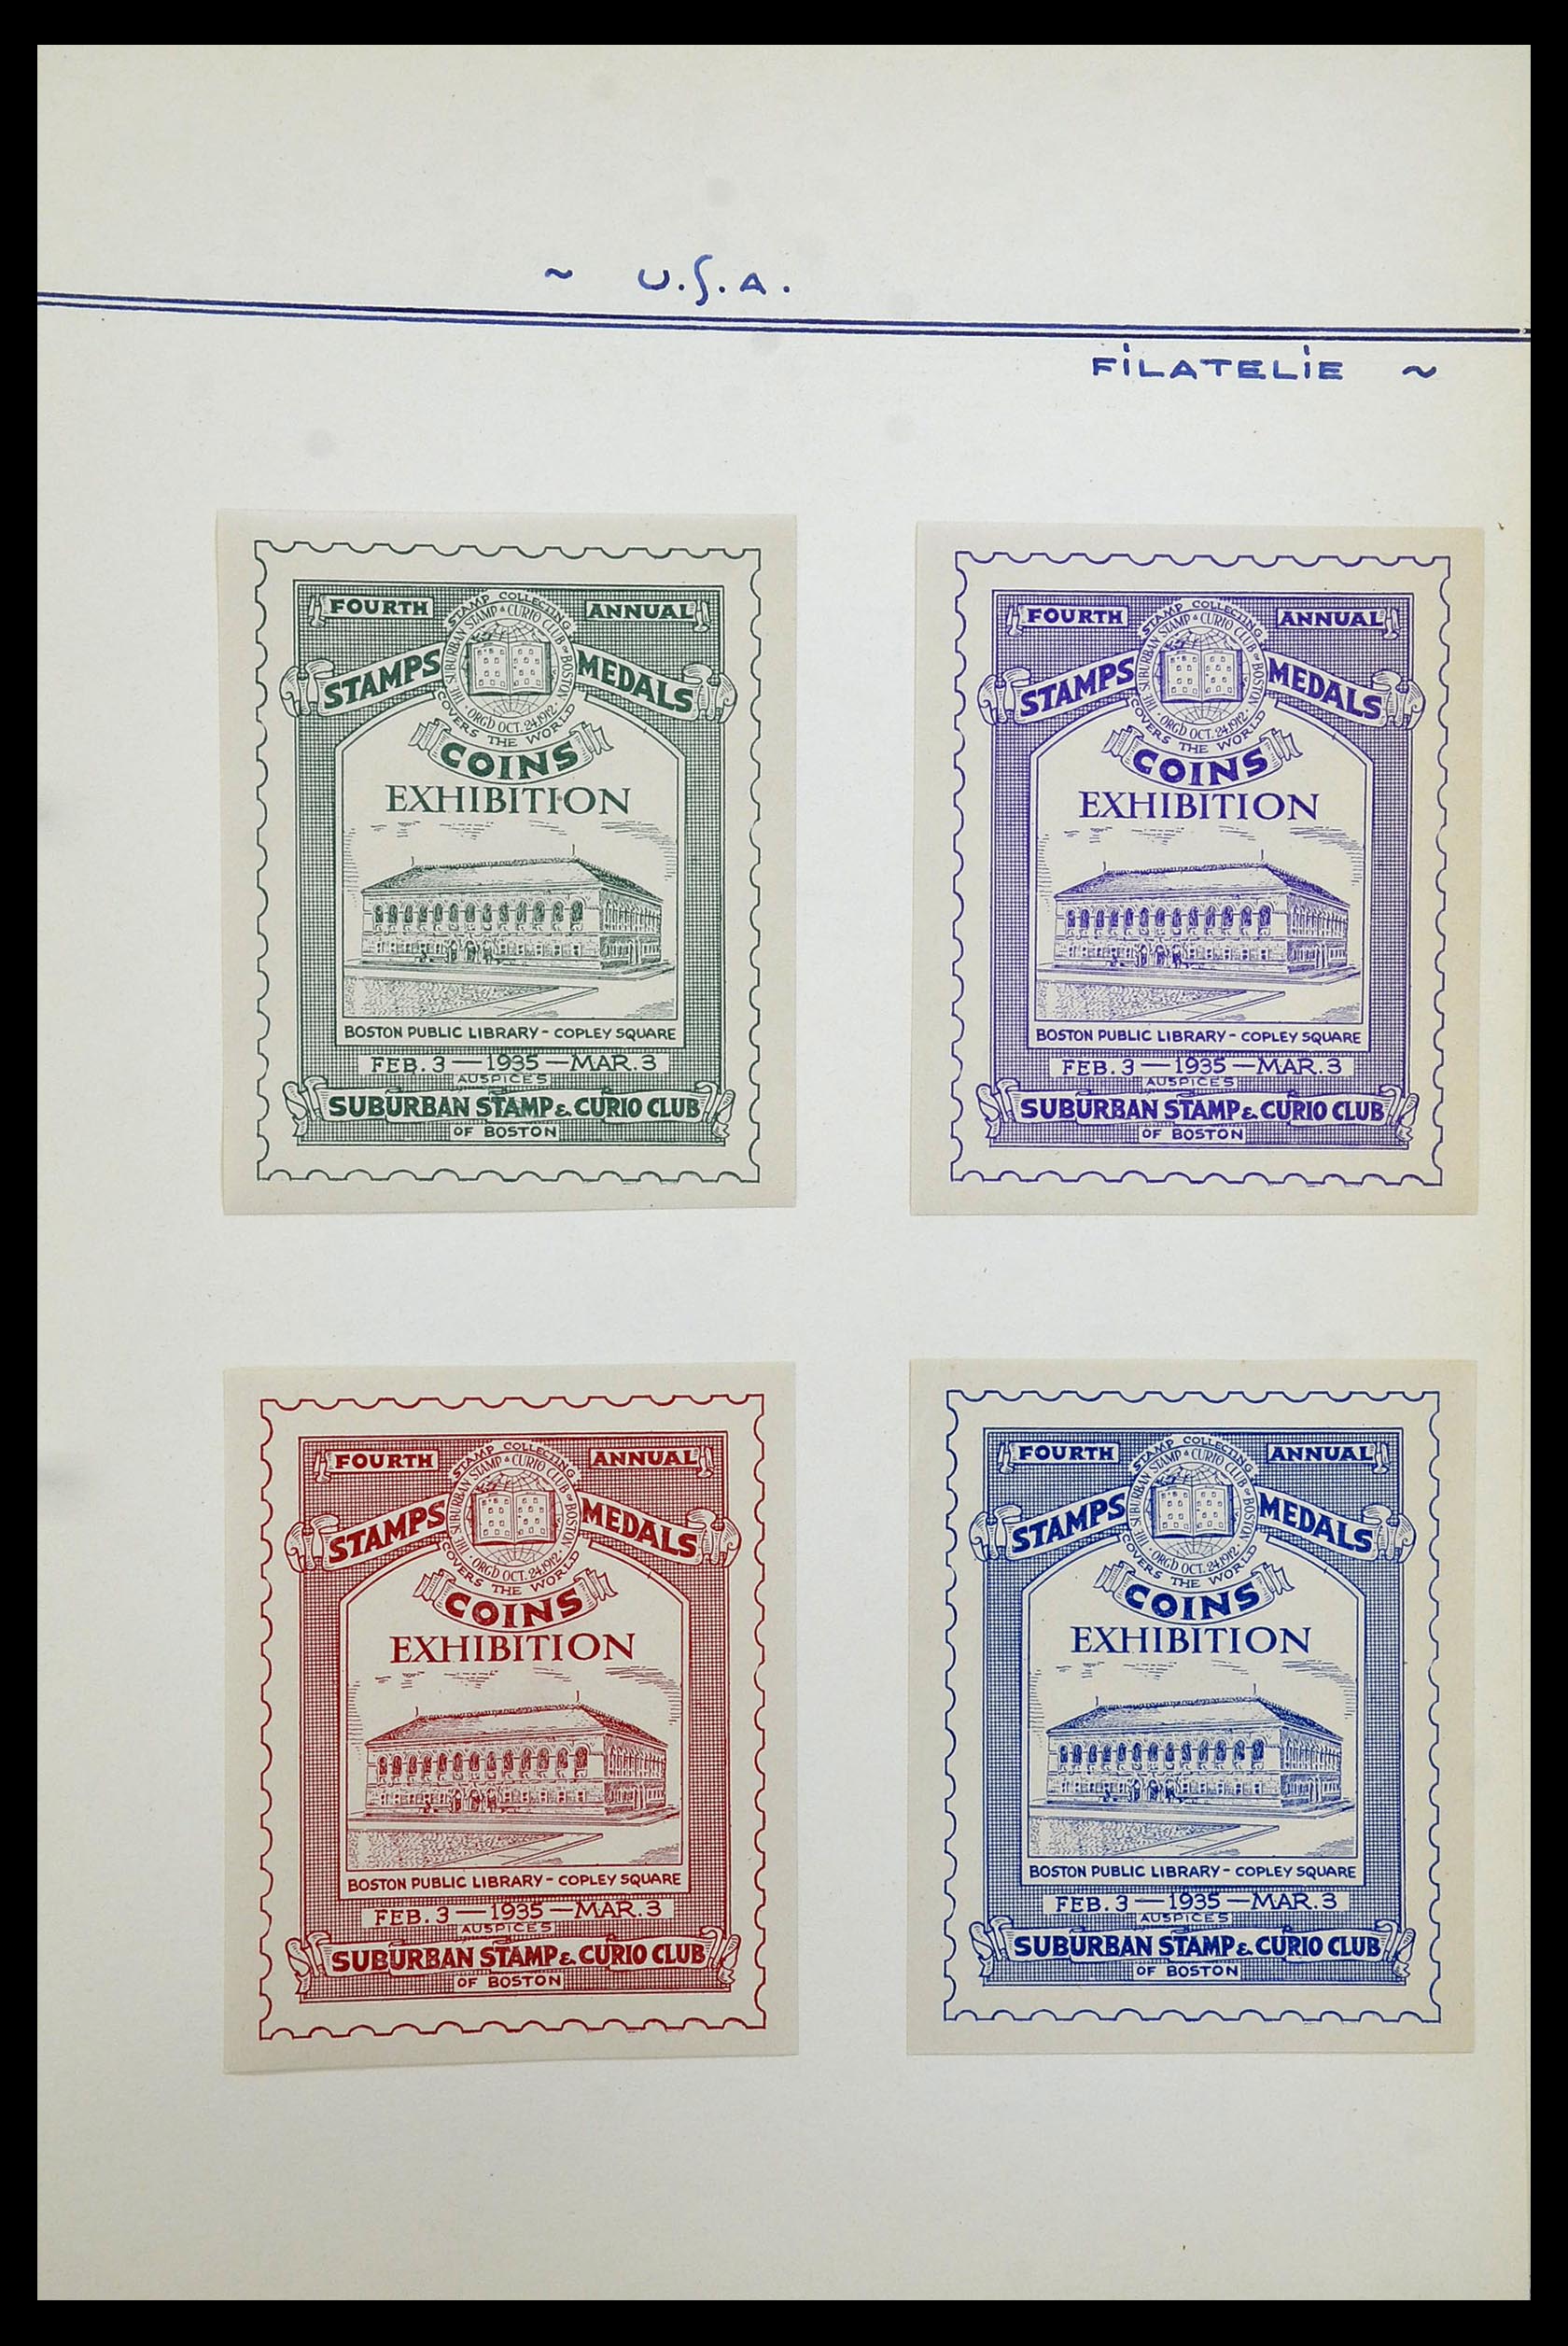 34486 021 - Stamp Collection 34486 USA philatelic labels 1926-1960.